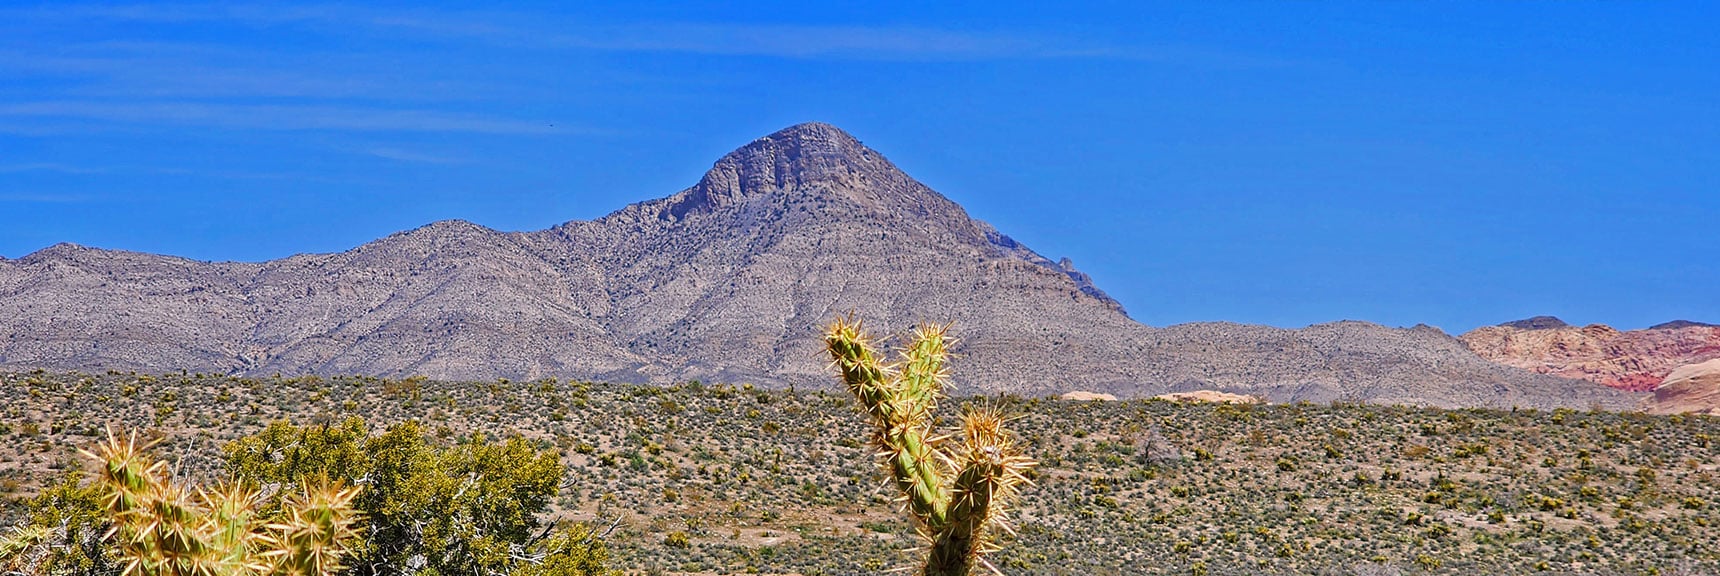 Turtlehead Peak Across Red Rock Canyon | Dales Trail | Red Rock Canyon National Conservation Area, Nevada | David Smith | LasVegasAreaTrails.com